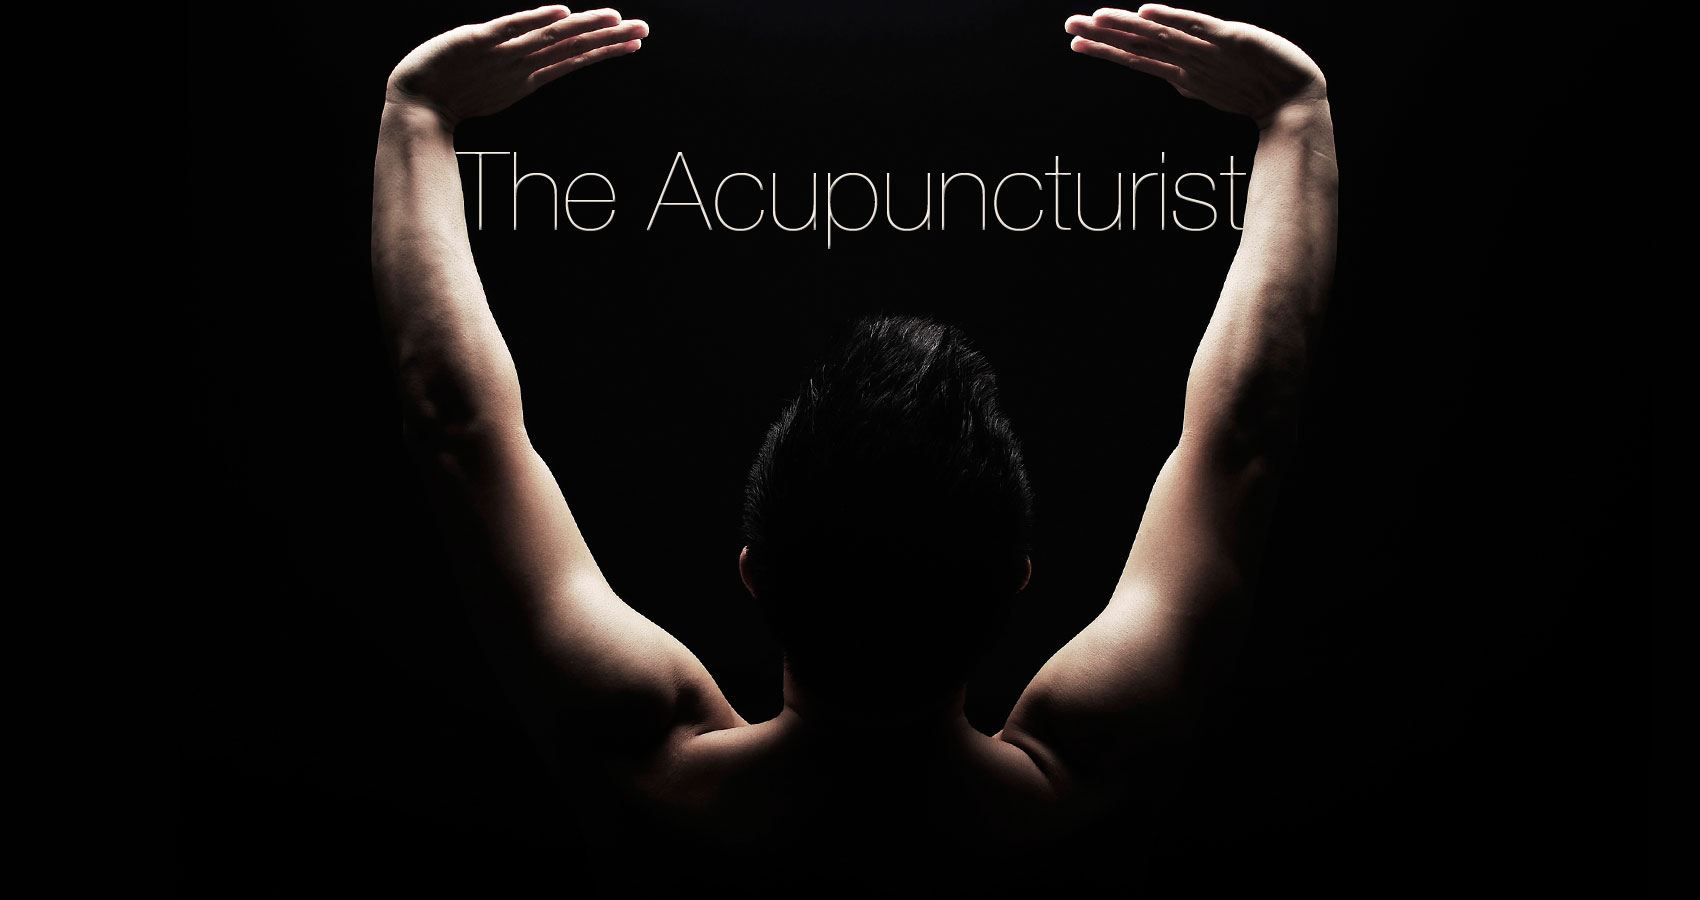 The Acupuncturist by Ryan Quinn Flanagan at Spillwords.com